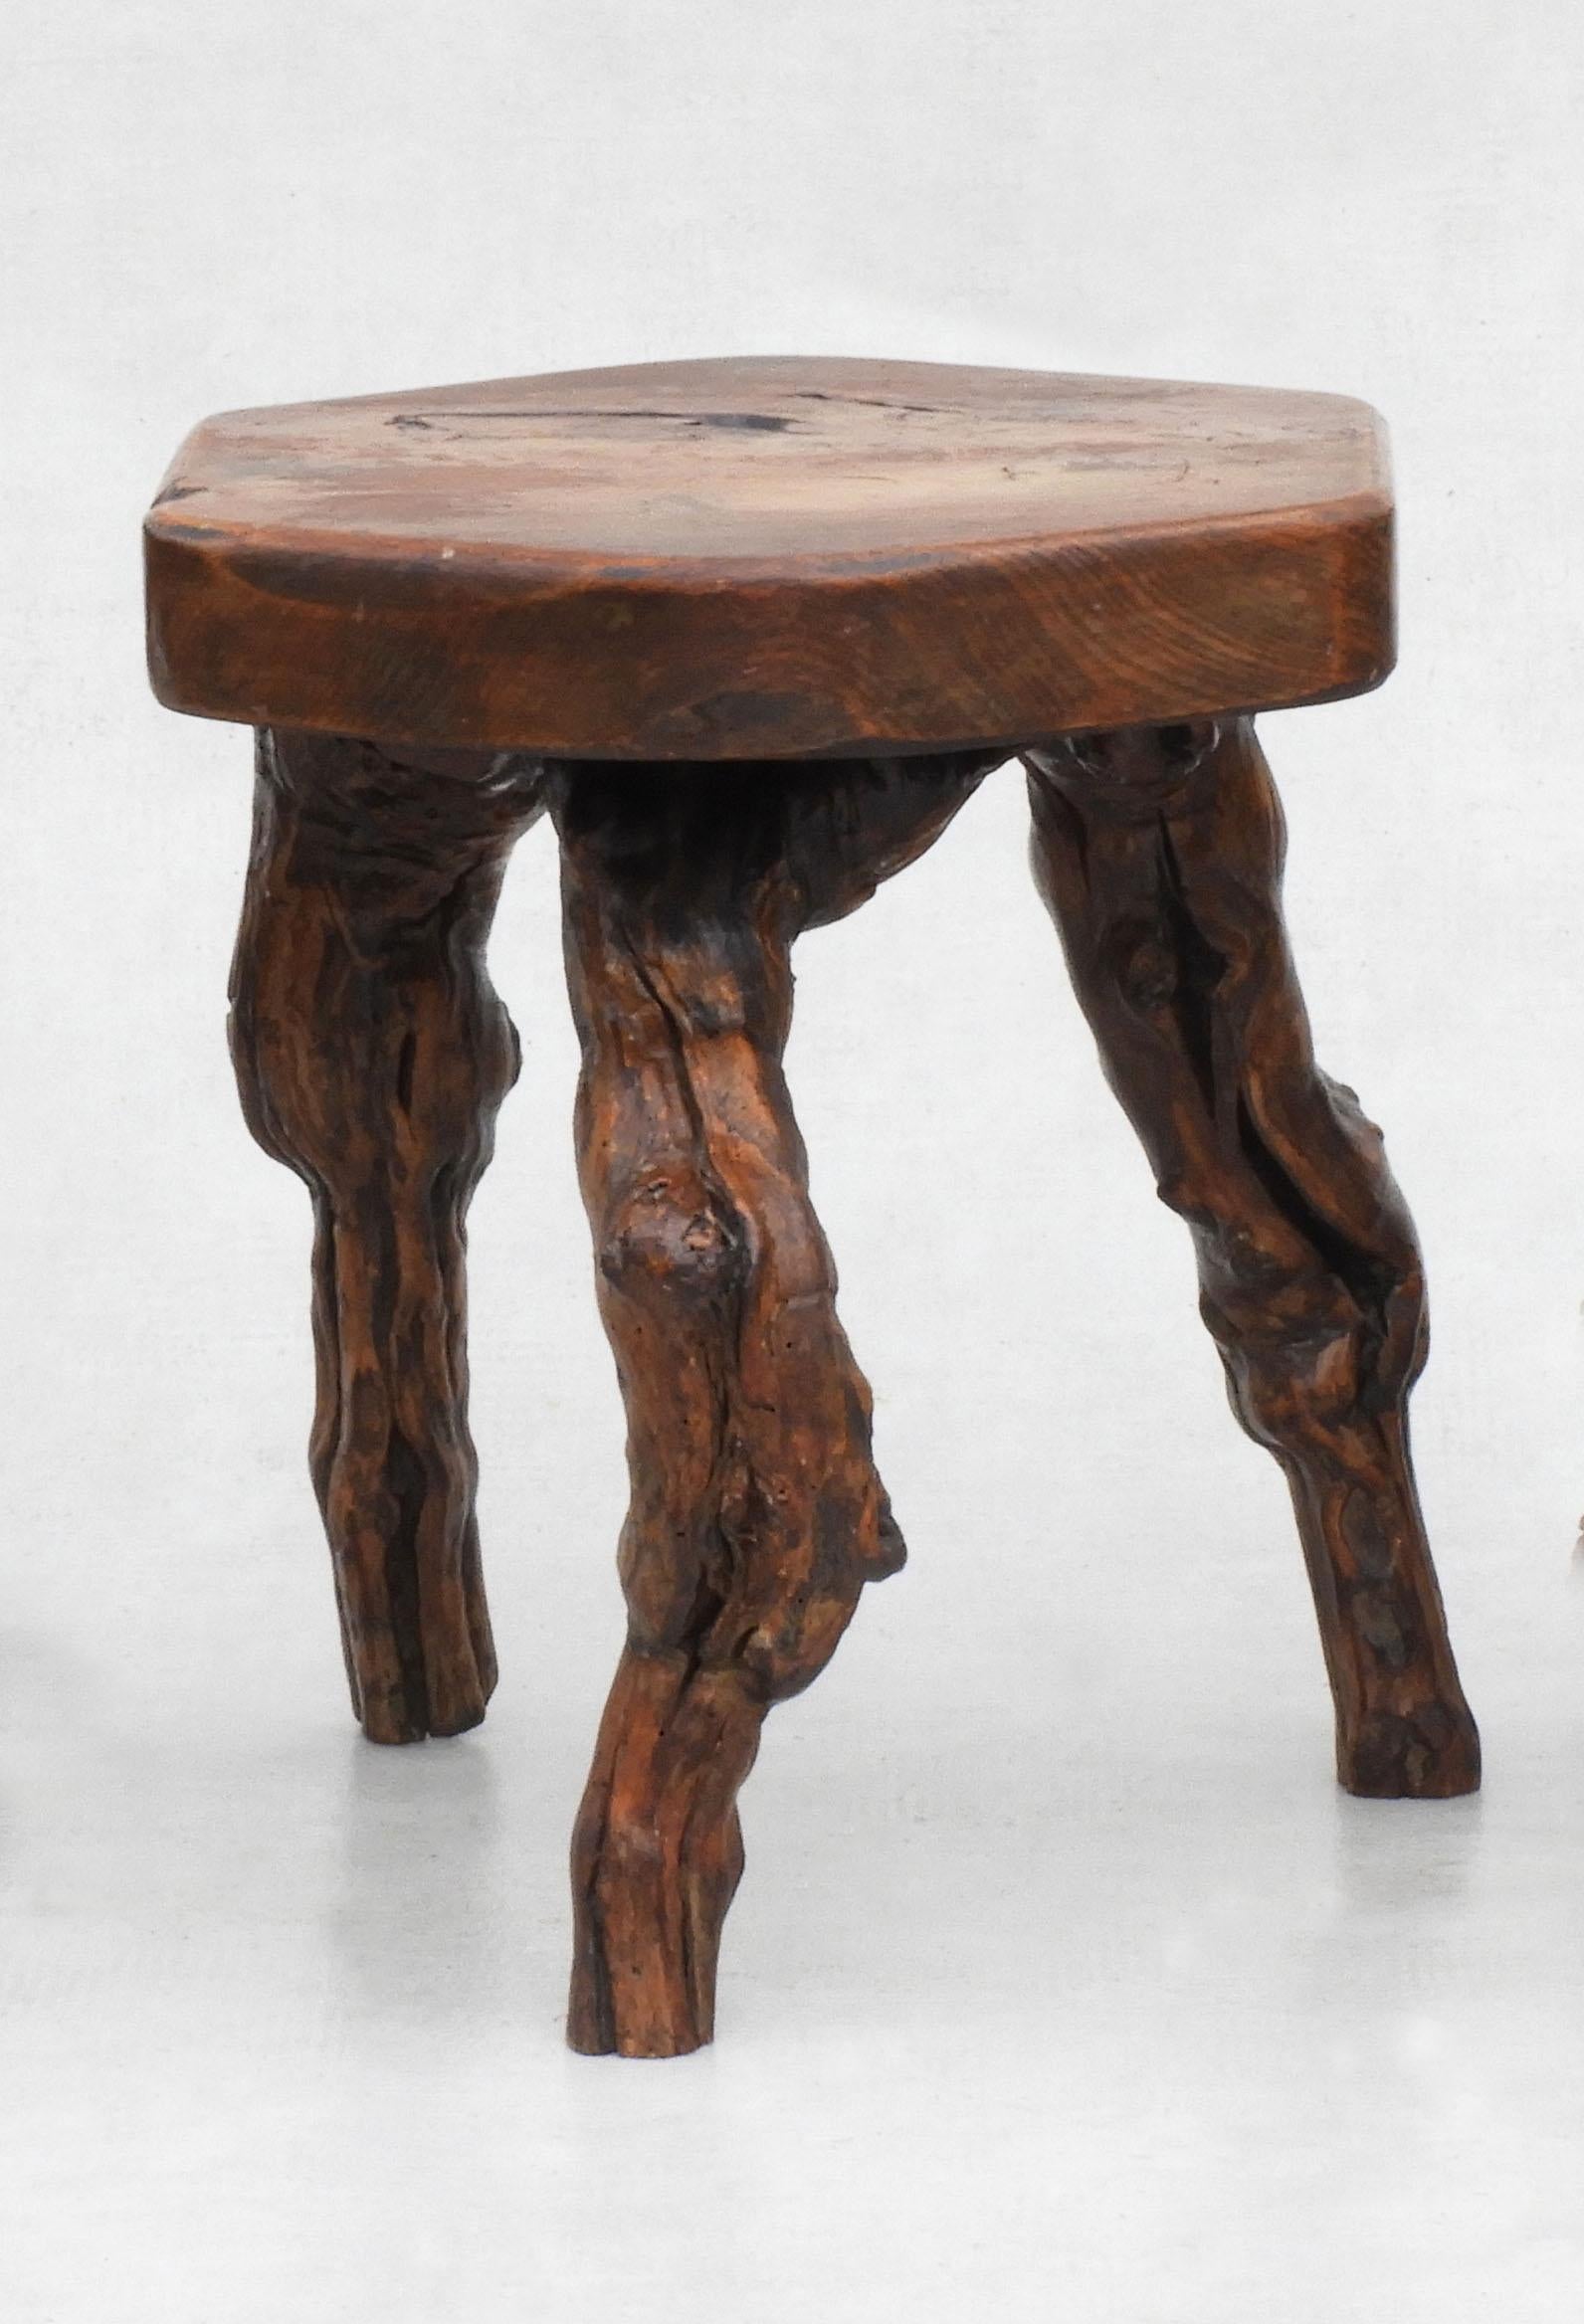 Hand-Crafted Vine Wood Tripod Stools, Side Tables, Nightstands, C1950, France